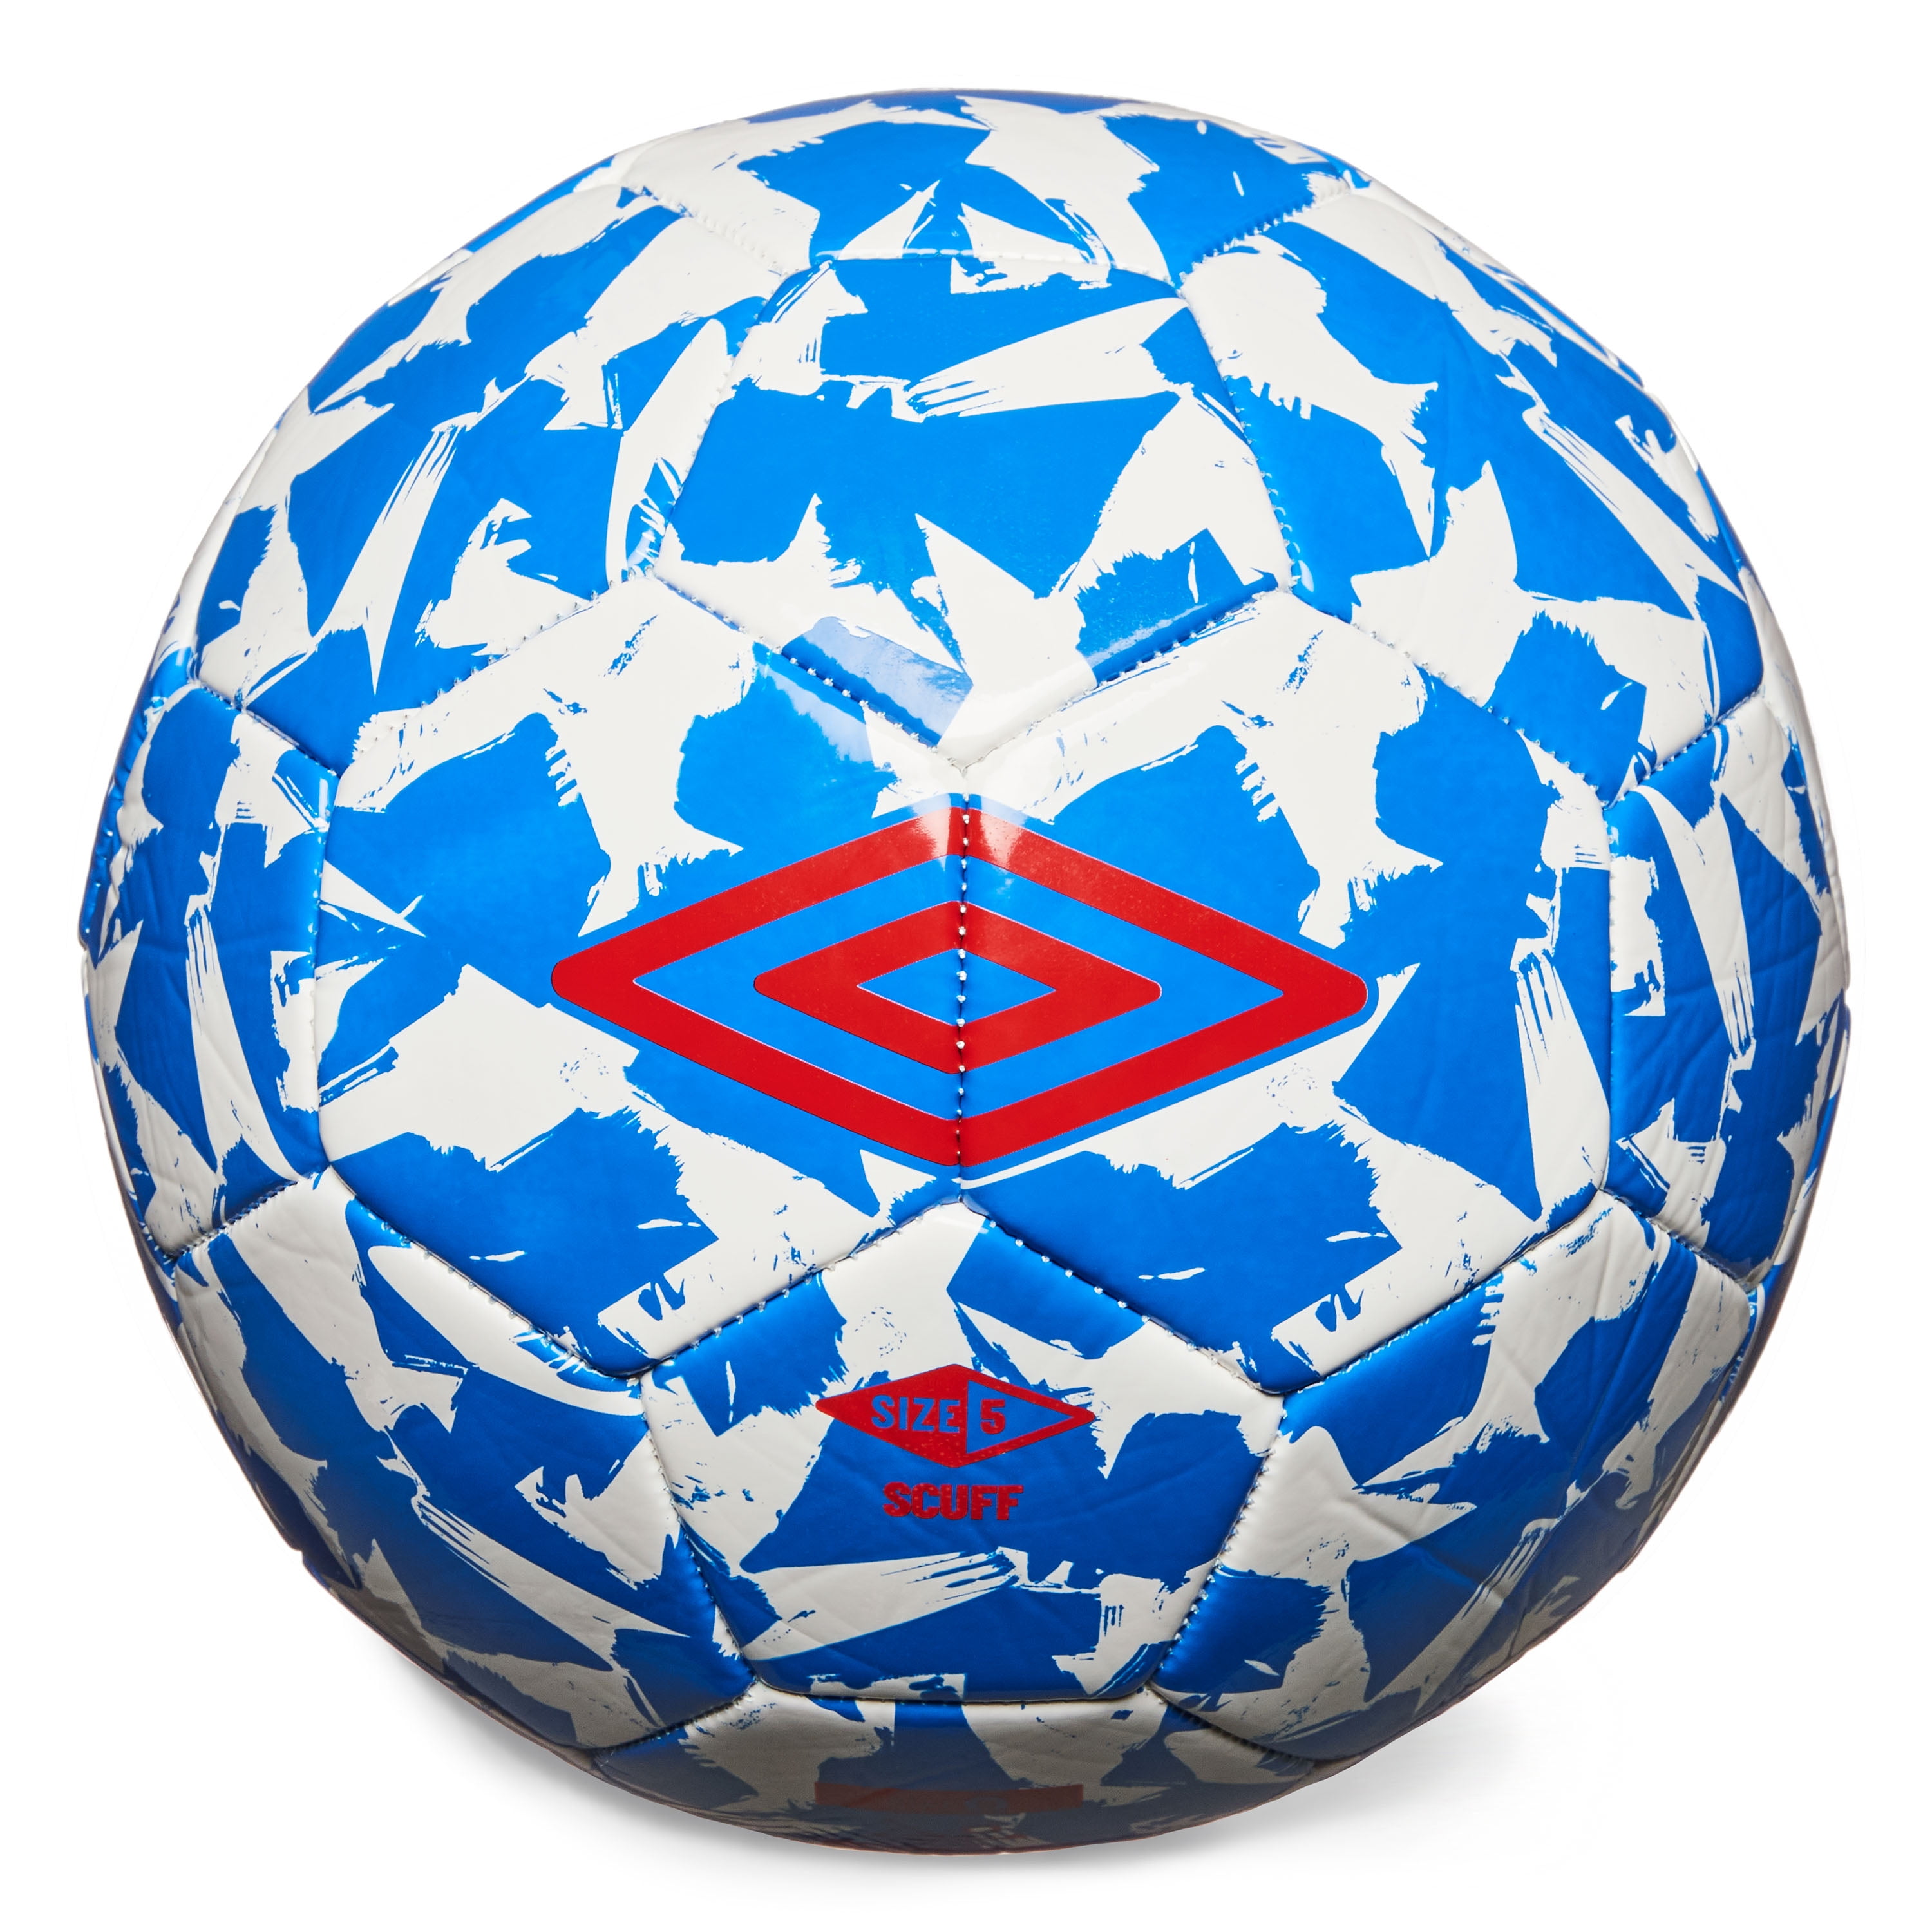 Classic Details about   Millenti US Soccer Ball Size 5 USA Red White and Blue Soccer Balls 